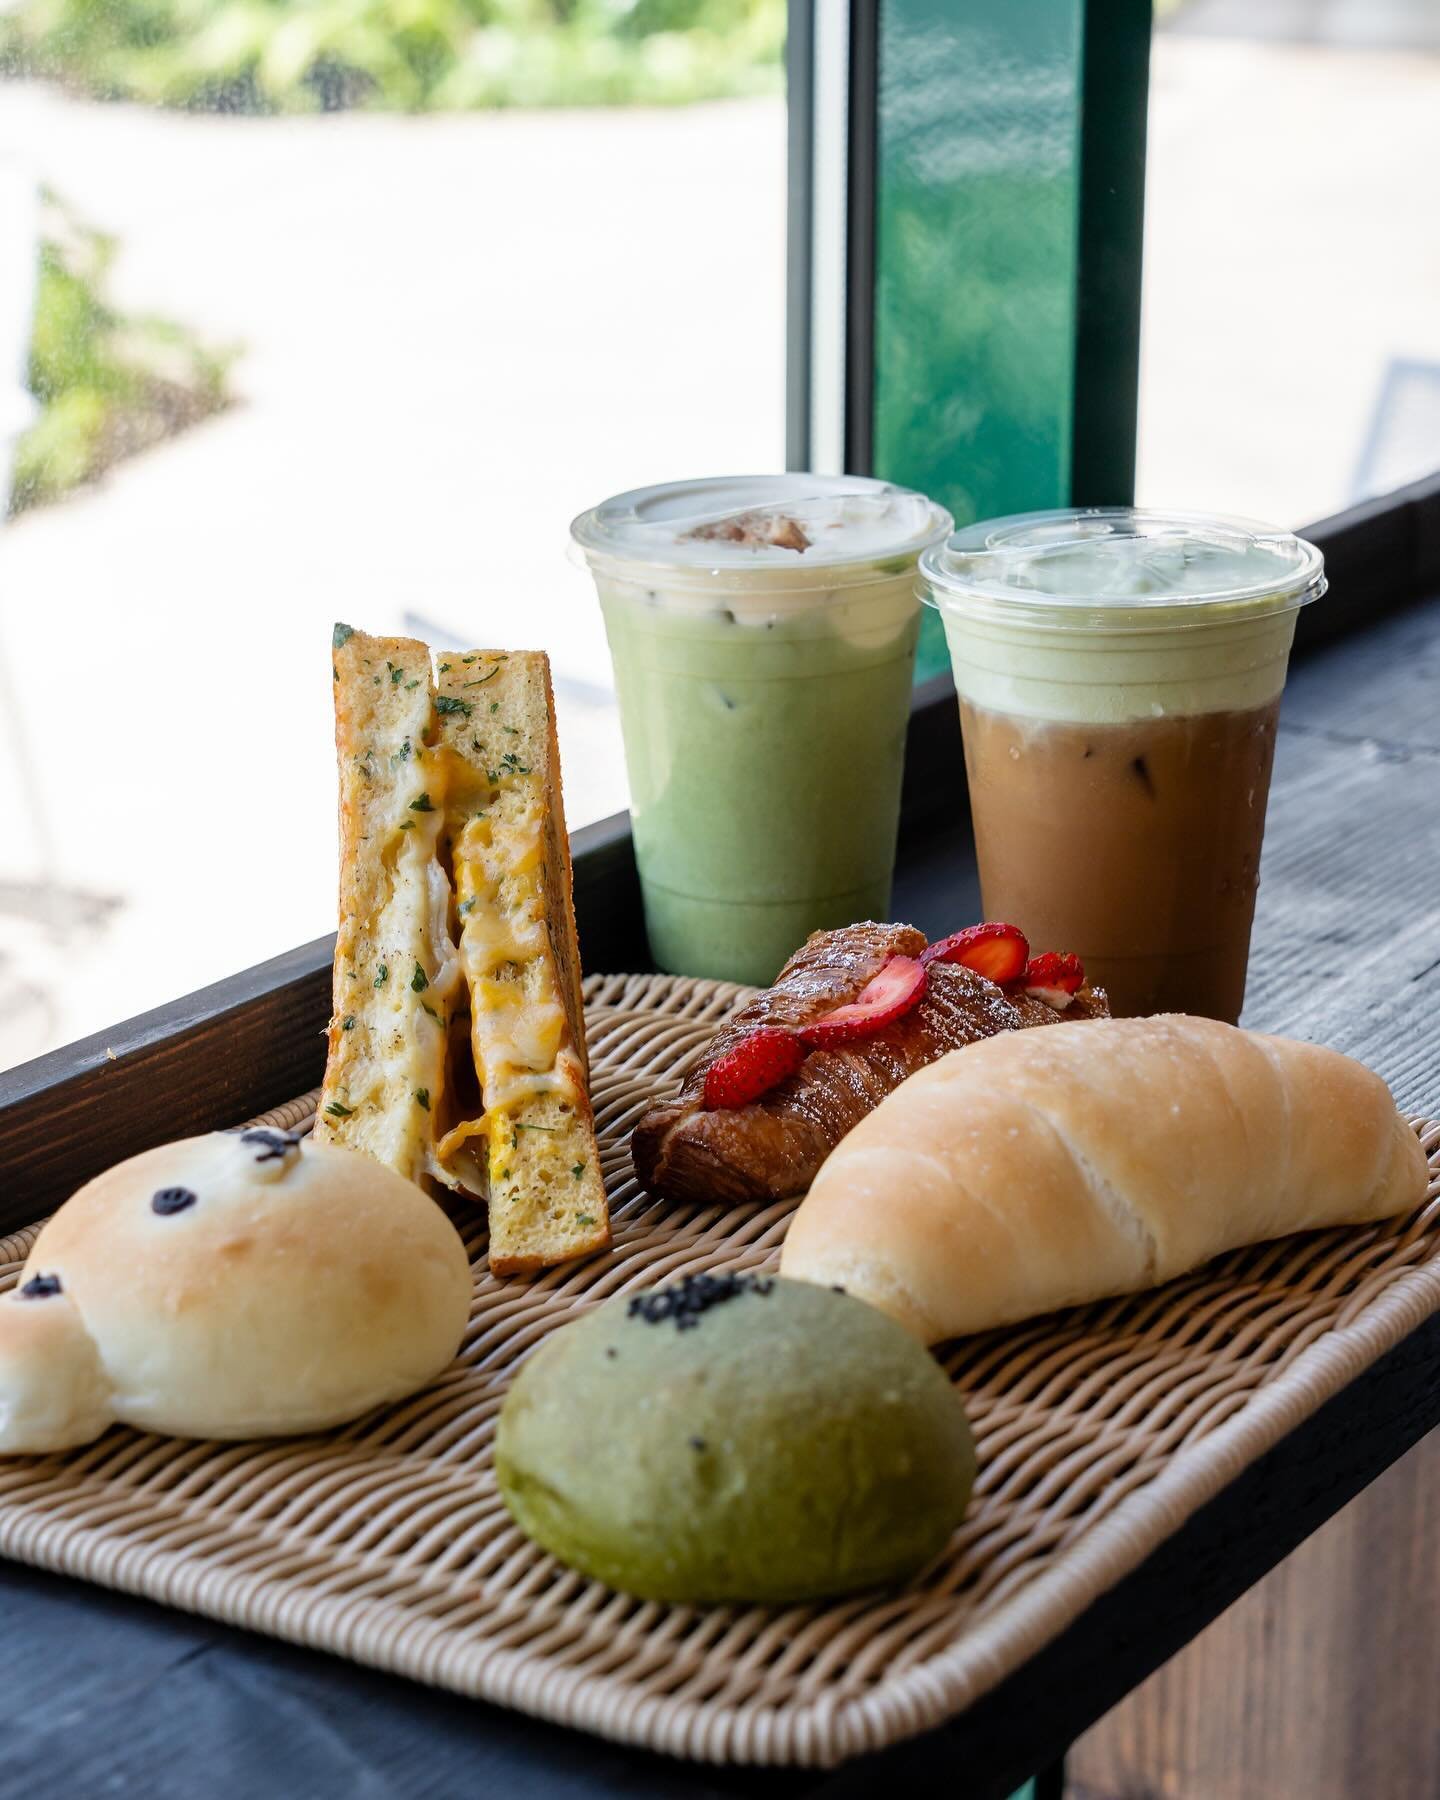 Life is what you bake it - and we&rsquo;re here to make it delicious 😋

Which is your favorite from us? ☺️ Comment down below

#okayamakobo #okayamakobohawaii #smalllocalbusiness #bakedgoods #bakery #freshbread #japanesebread #japanesebakery #hawaii